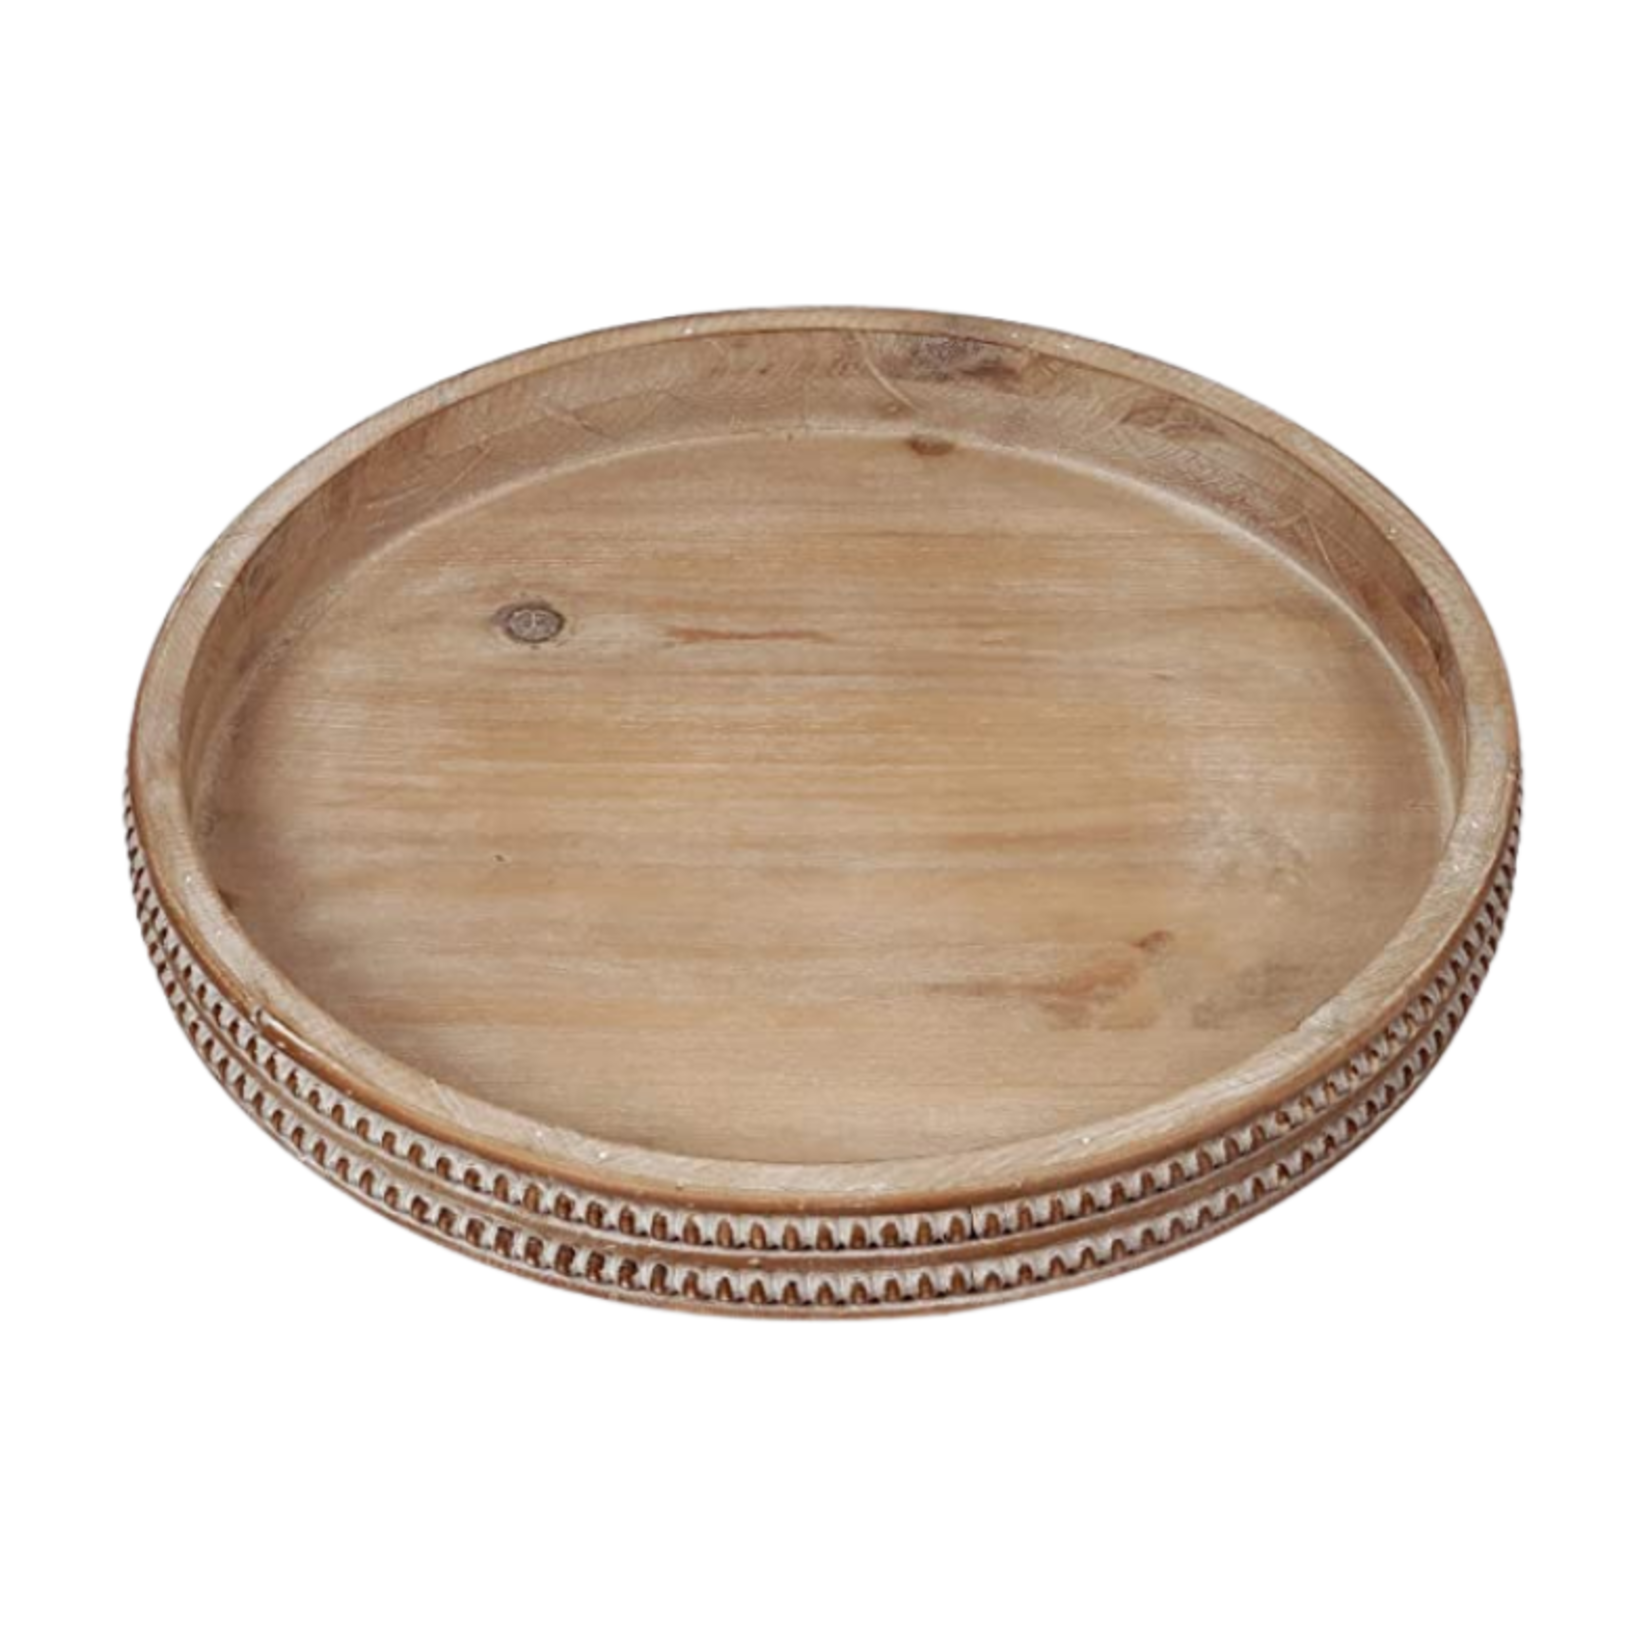 Carah and Cossh Round Wooden Beaded Trim Serving Tray